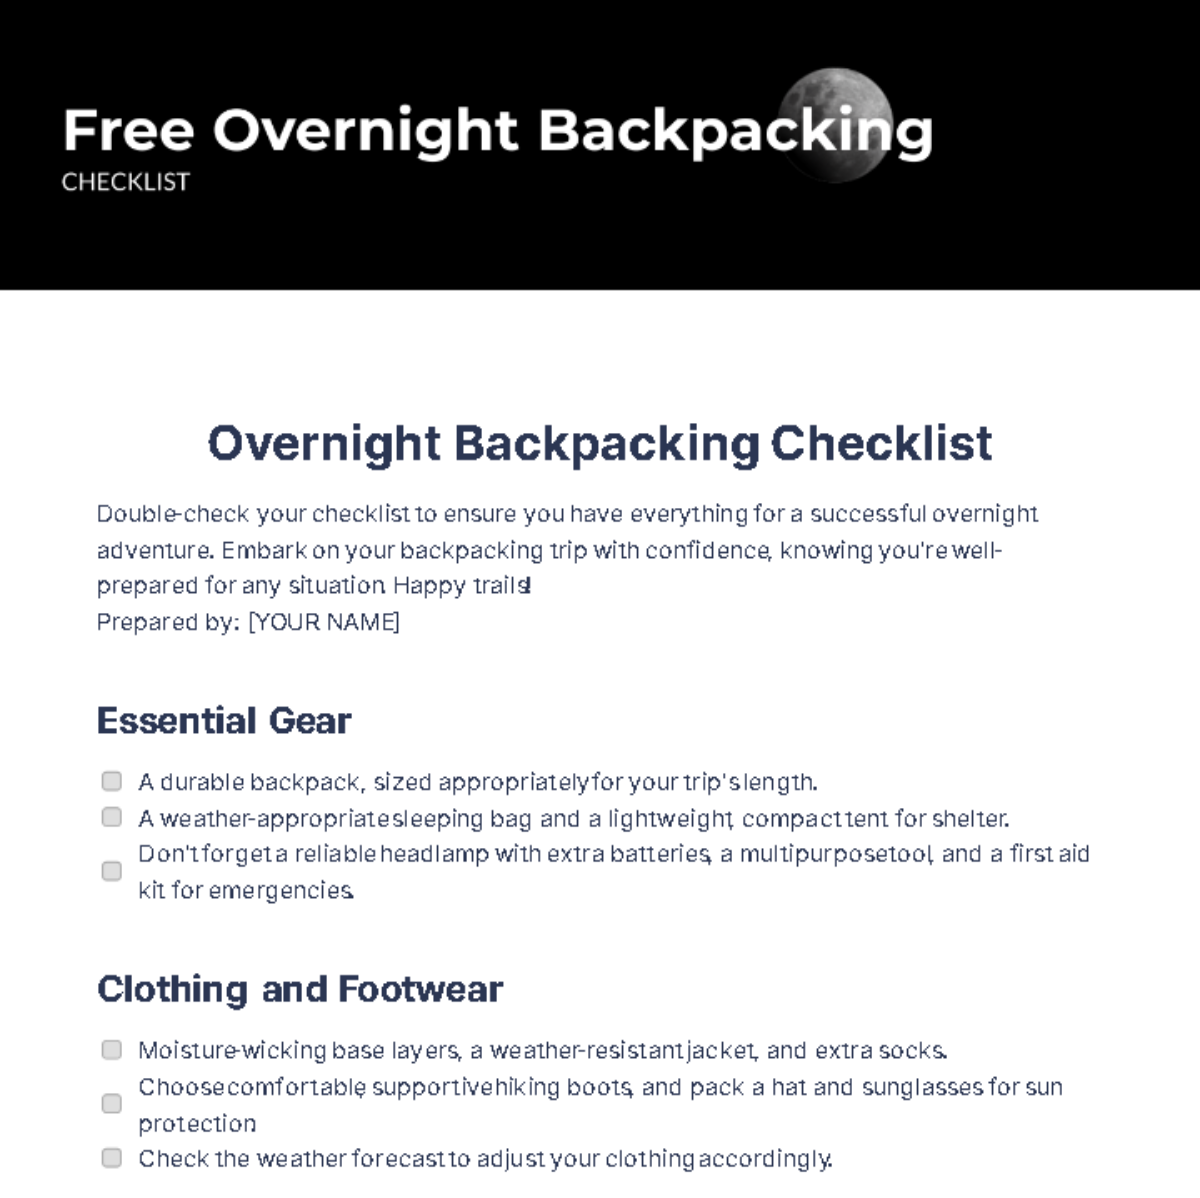 Free Overnight Backpacking Checklist Template